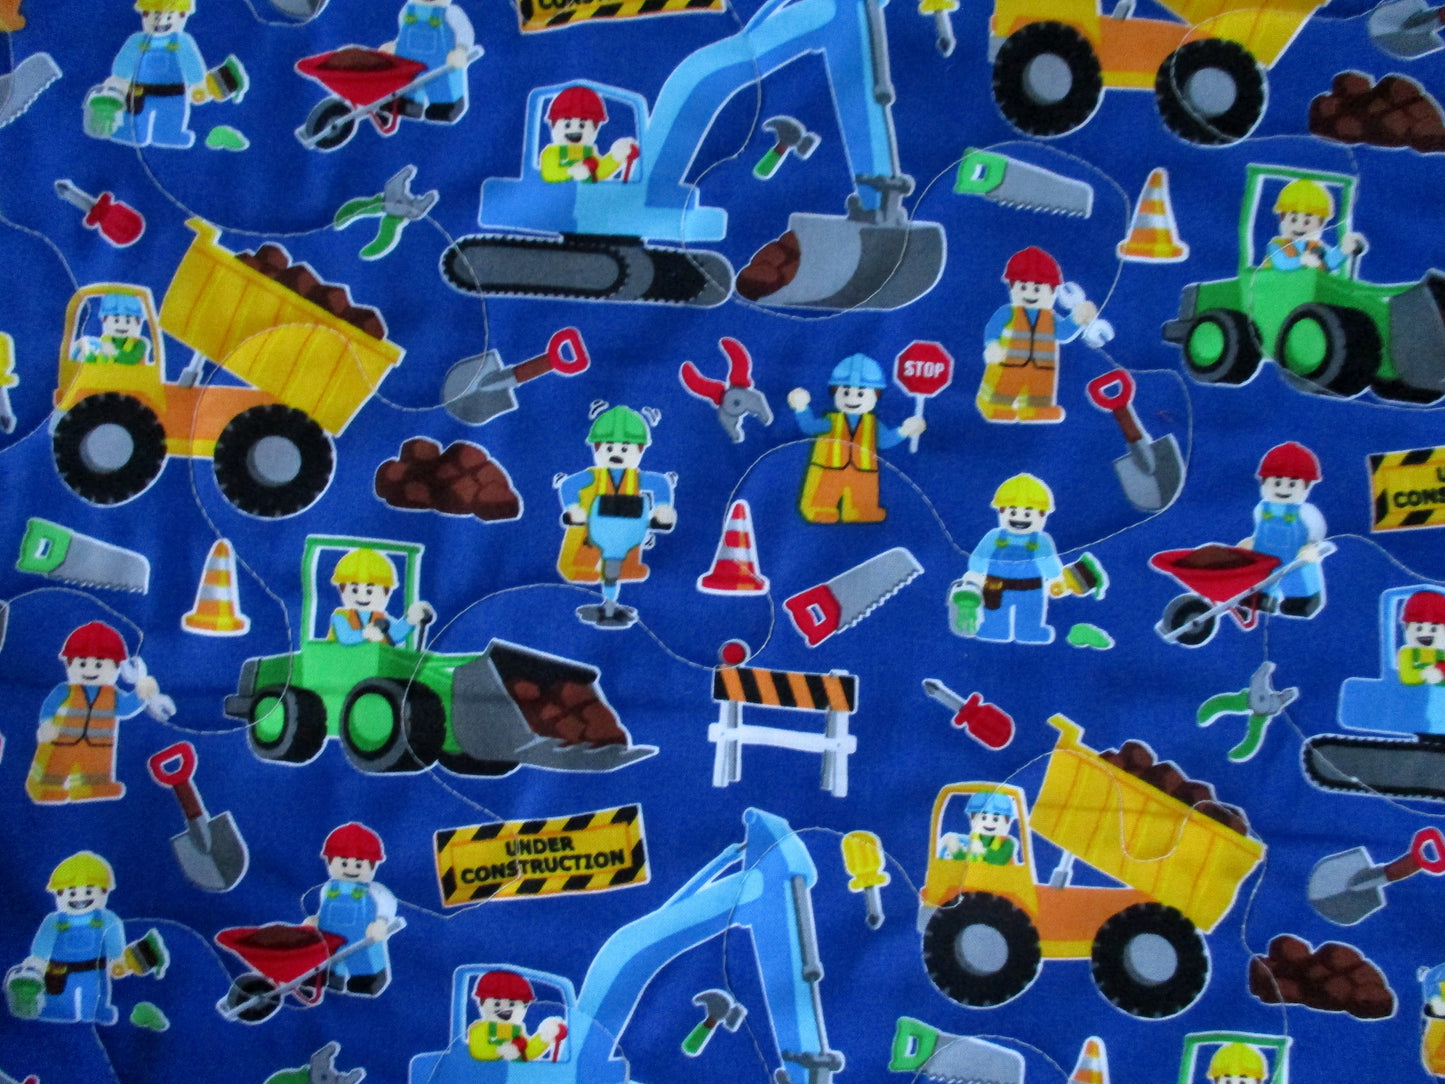 Boys Lego Construction Site Quilted Boys Infant Crib Toddler Blanket